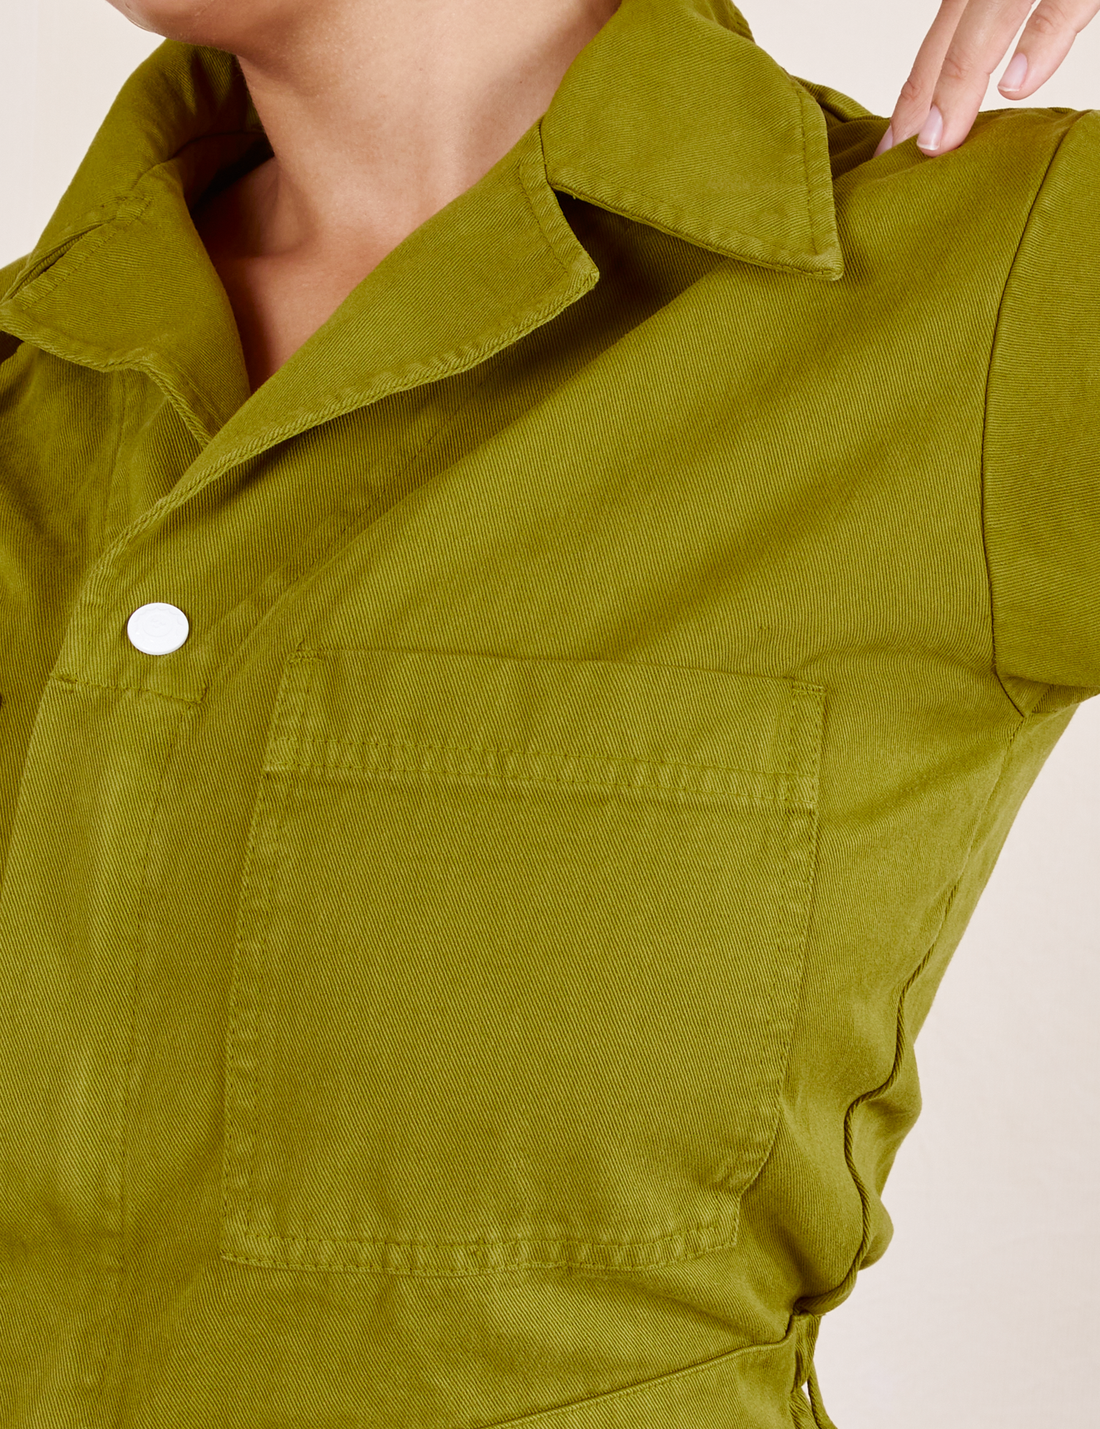 Short Sleeve Jumpsuit in Olive Green front pocket and collar close up on Tiara